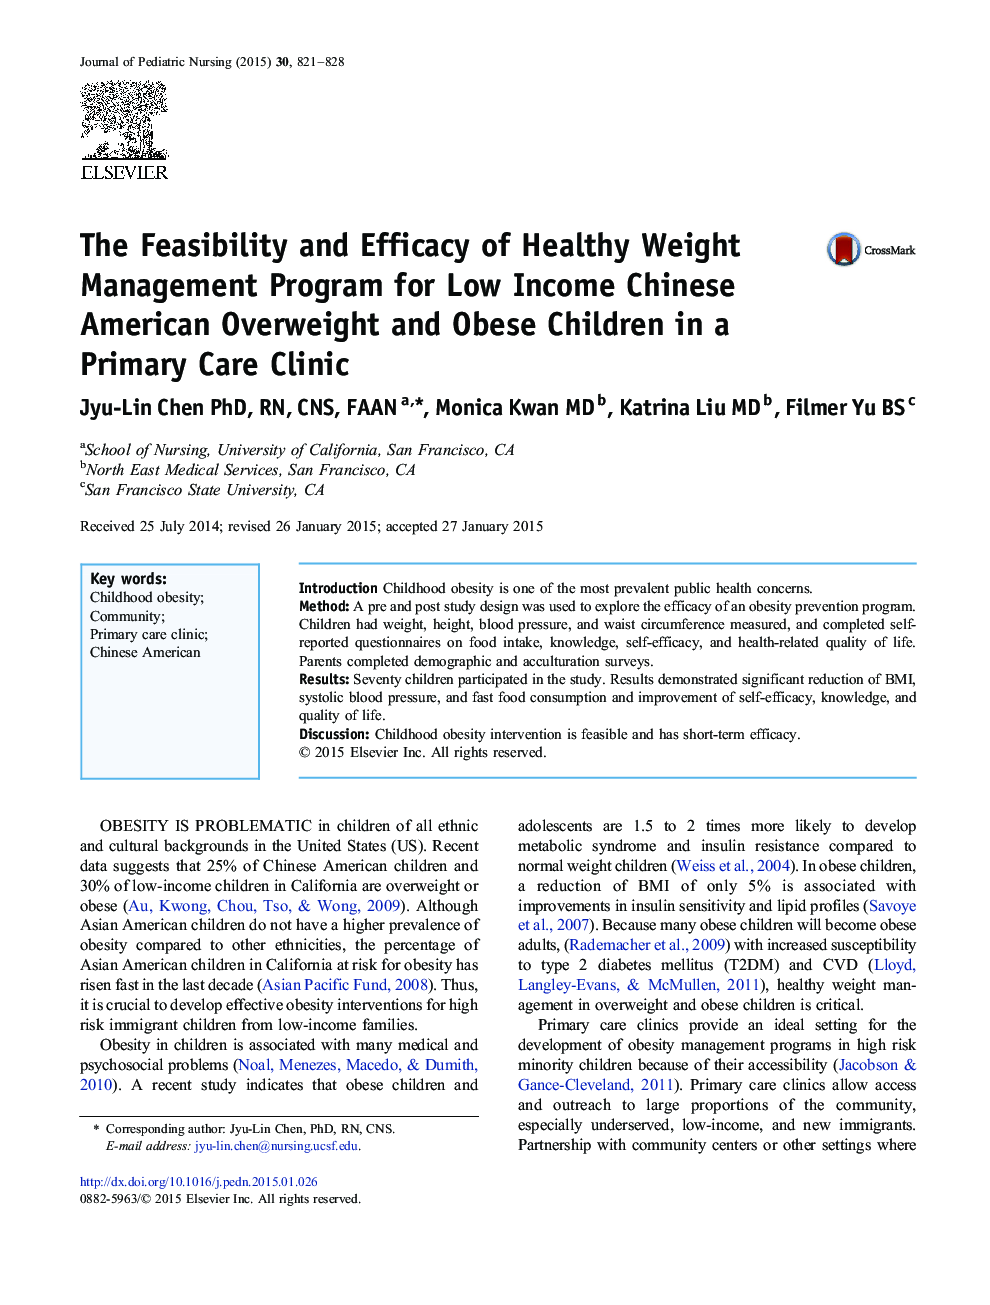 The Feasibility and Efficacy of Healthy Weight Management Program for Low Income Chinese American Overweight and Obese Children in a Primary Care Clinic